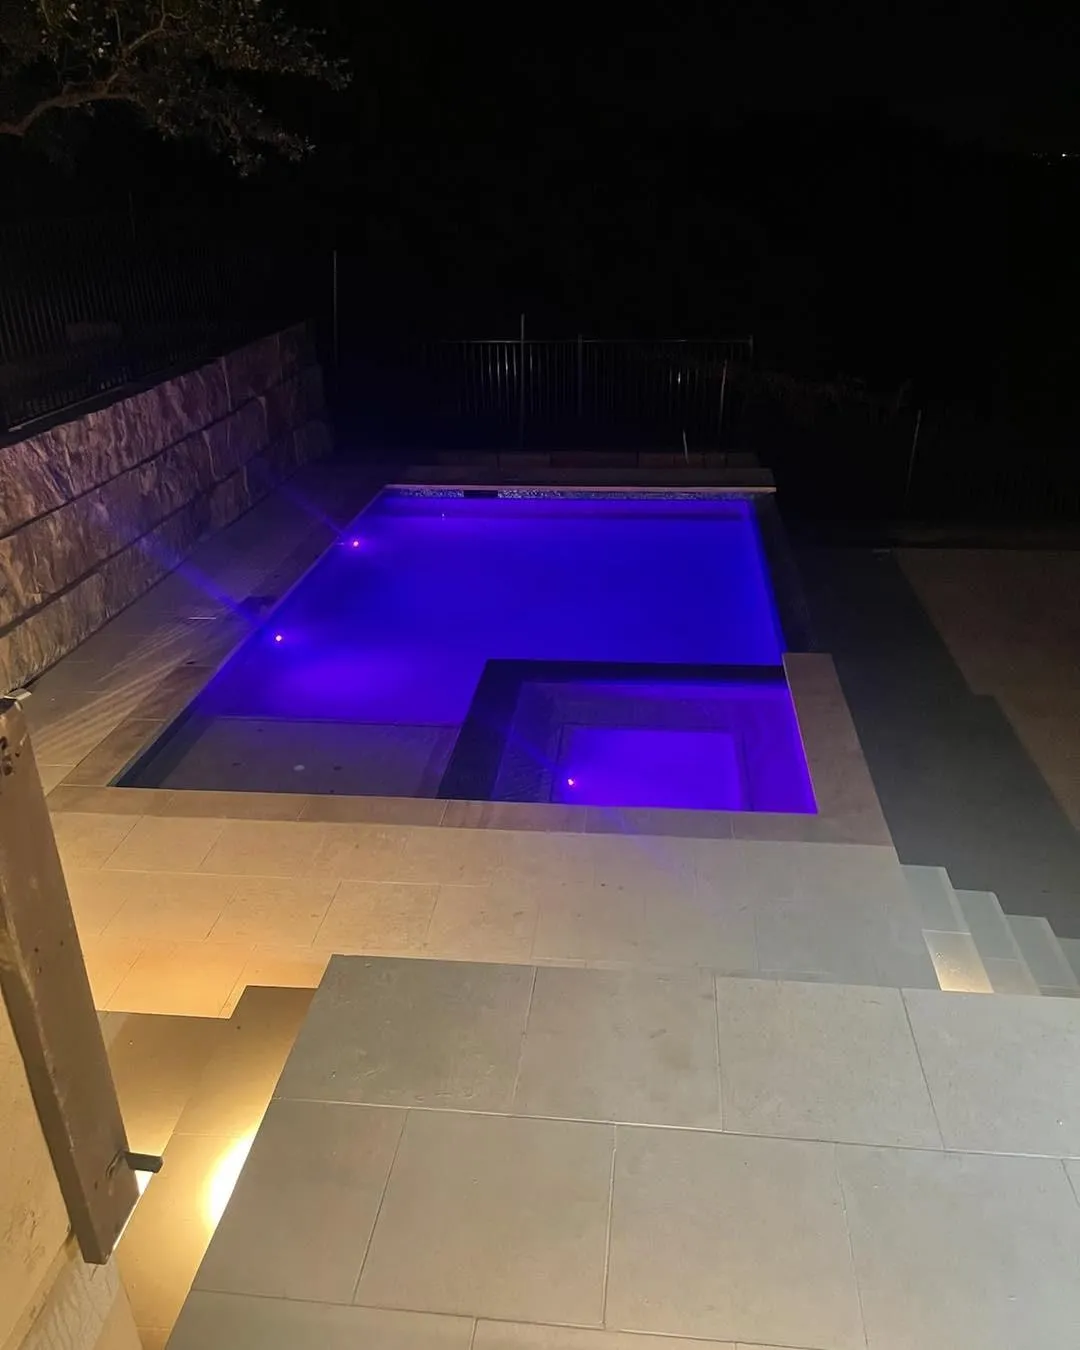 Lagoon Pool Installation for Just Great Pools in Lakeway, TX